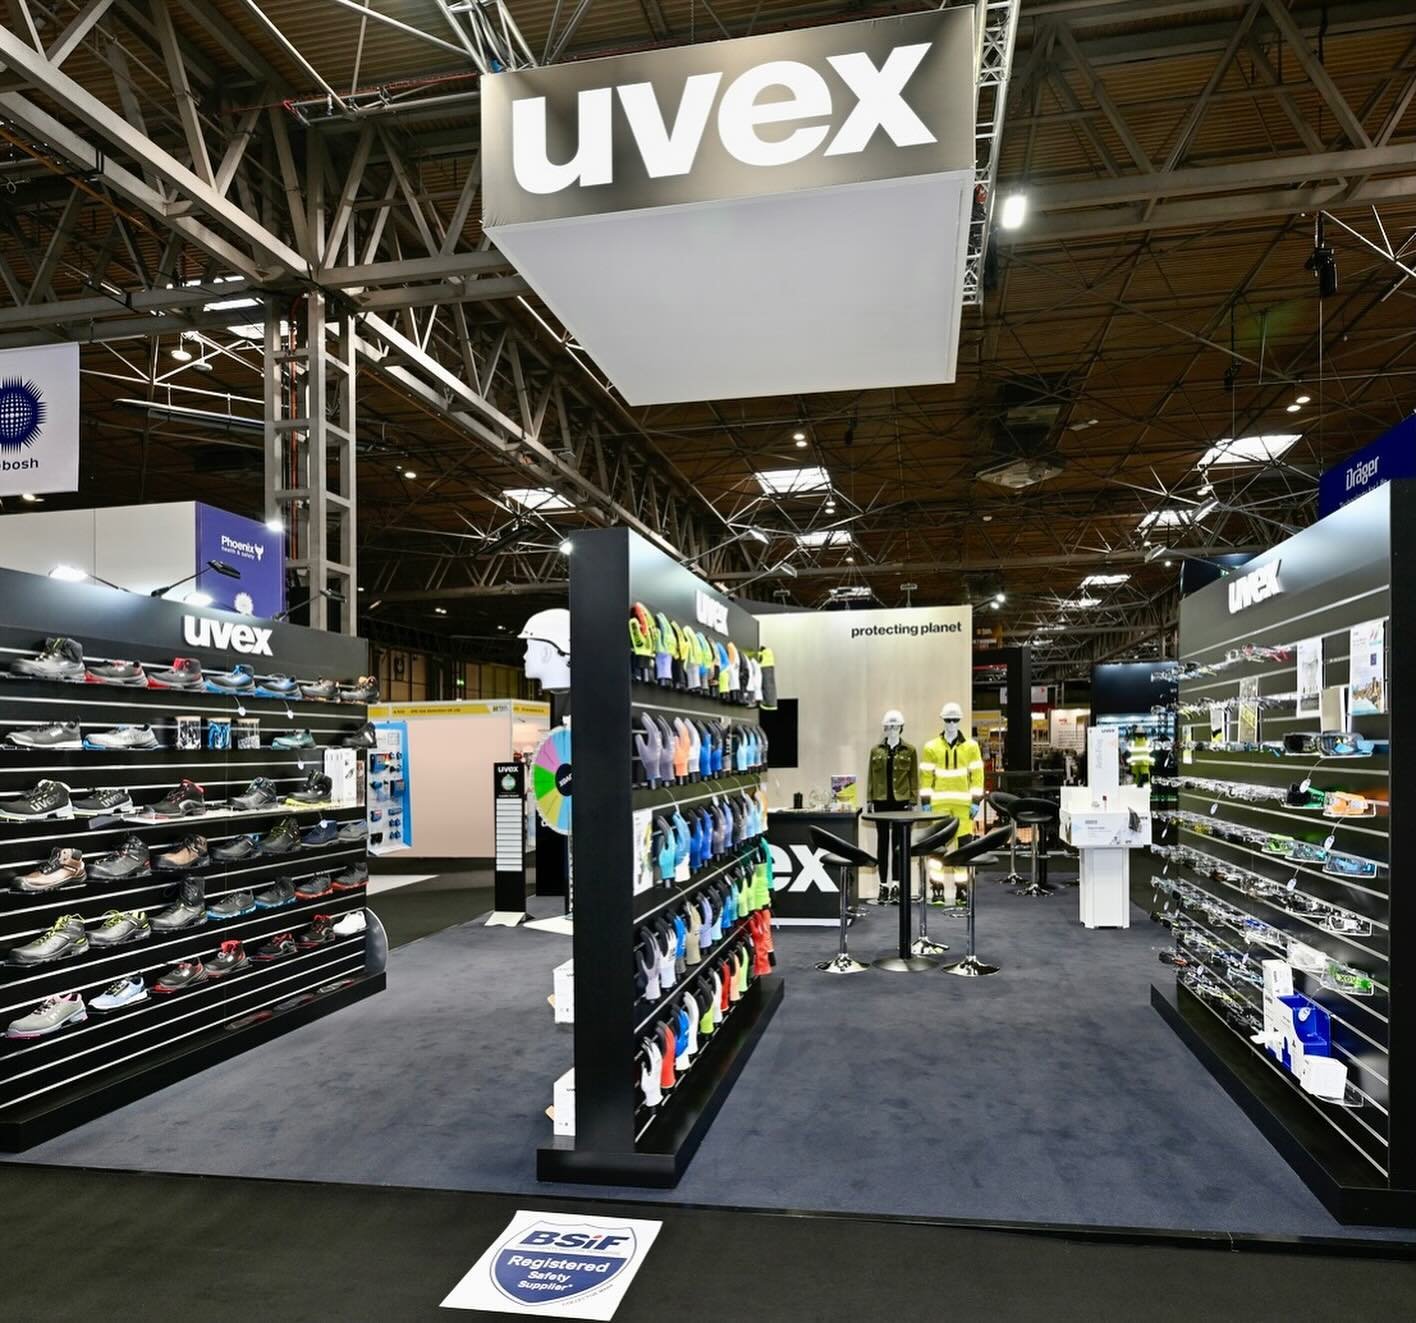 Last day of the #healthandsafetyevent at the #nec today, so last chance to see this beauty we built for our friends @uvexsafety along with their range of head to toe PPE solutions, hall 4 stand F20 #hse24 #standdesign #tradeshowbooth #exhibitiondesig